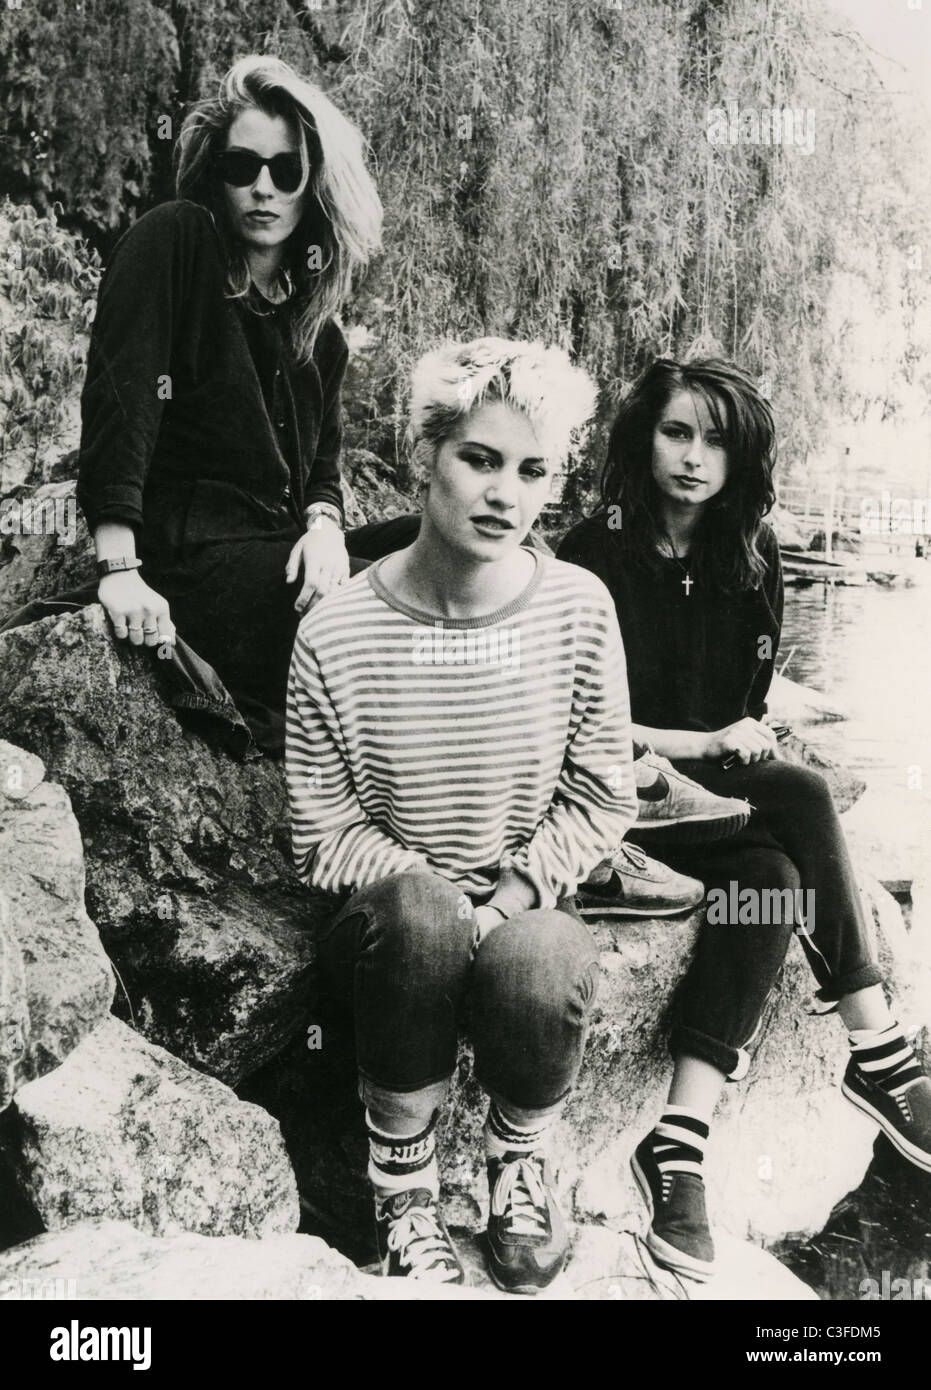 BANANARAMA Promotional photo of UK pop group about 1984. From l: Sarah Dallin, Siobhan Fahey and Keren Woodward Stock Photo